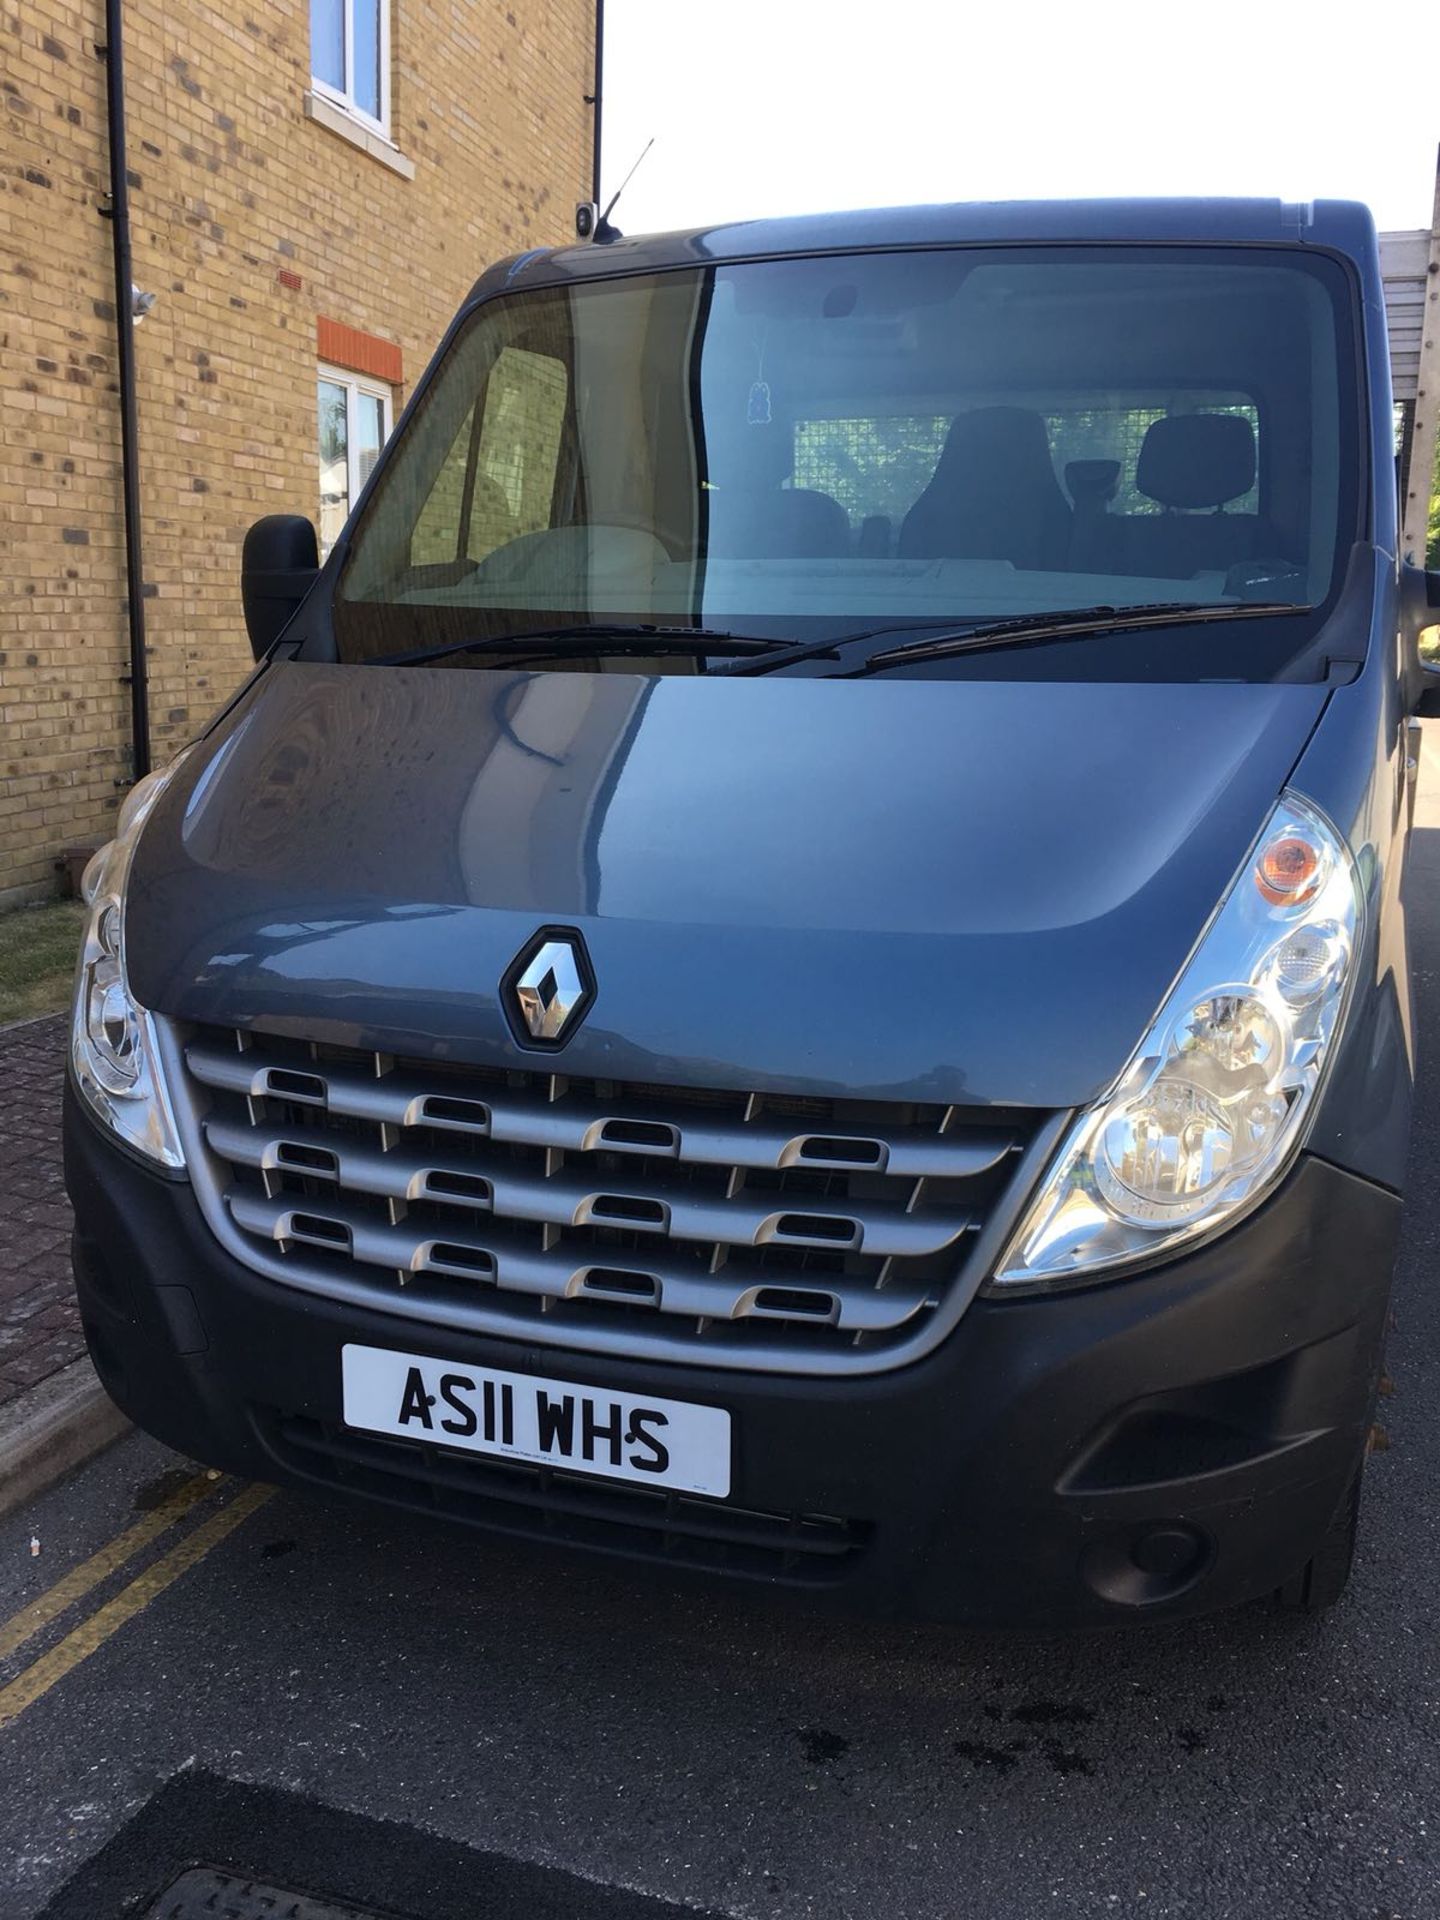 2012 RENAULT MASTER 2.3 DCI LL35 DROPSIDE PICKUP 3.5 TON GROSS TWIN WHEEL. 137,000 MILES. - Image 14 of 26